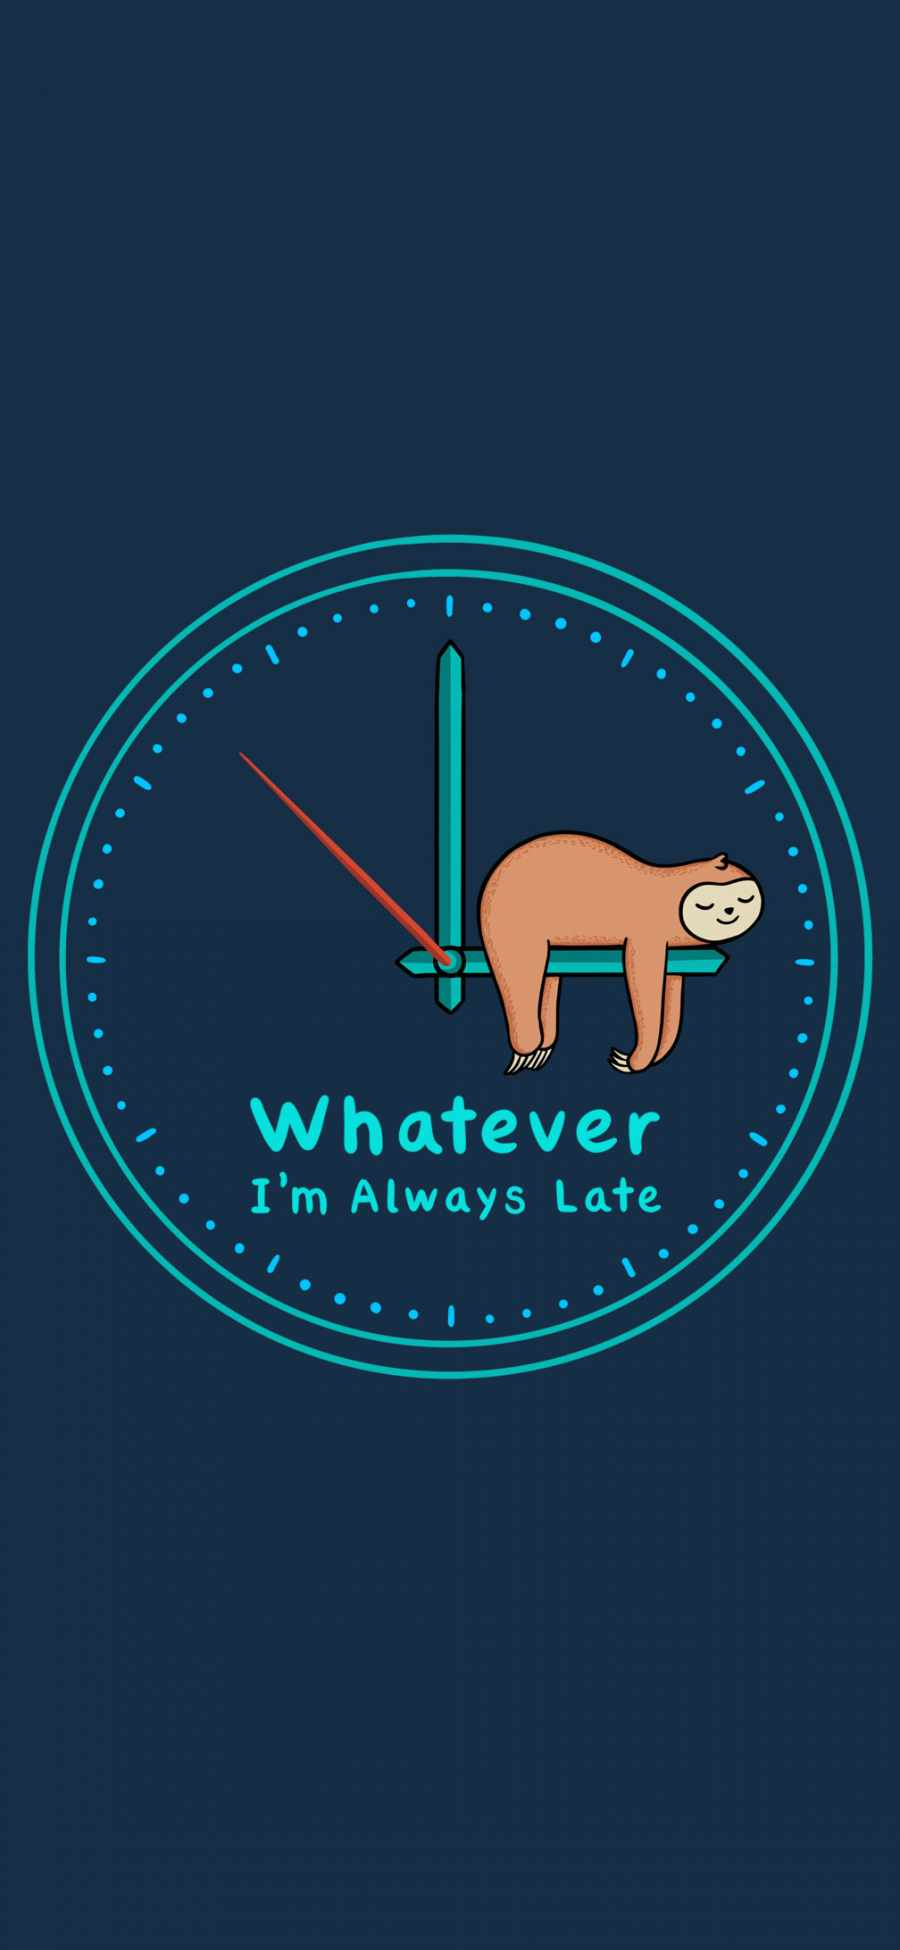 I Am Always Late IPhone Wallpaper HD  IPhone Wallpapers